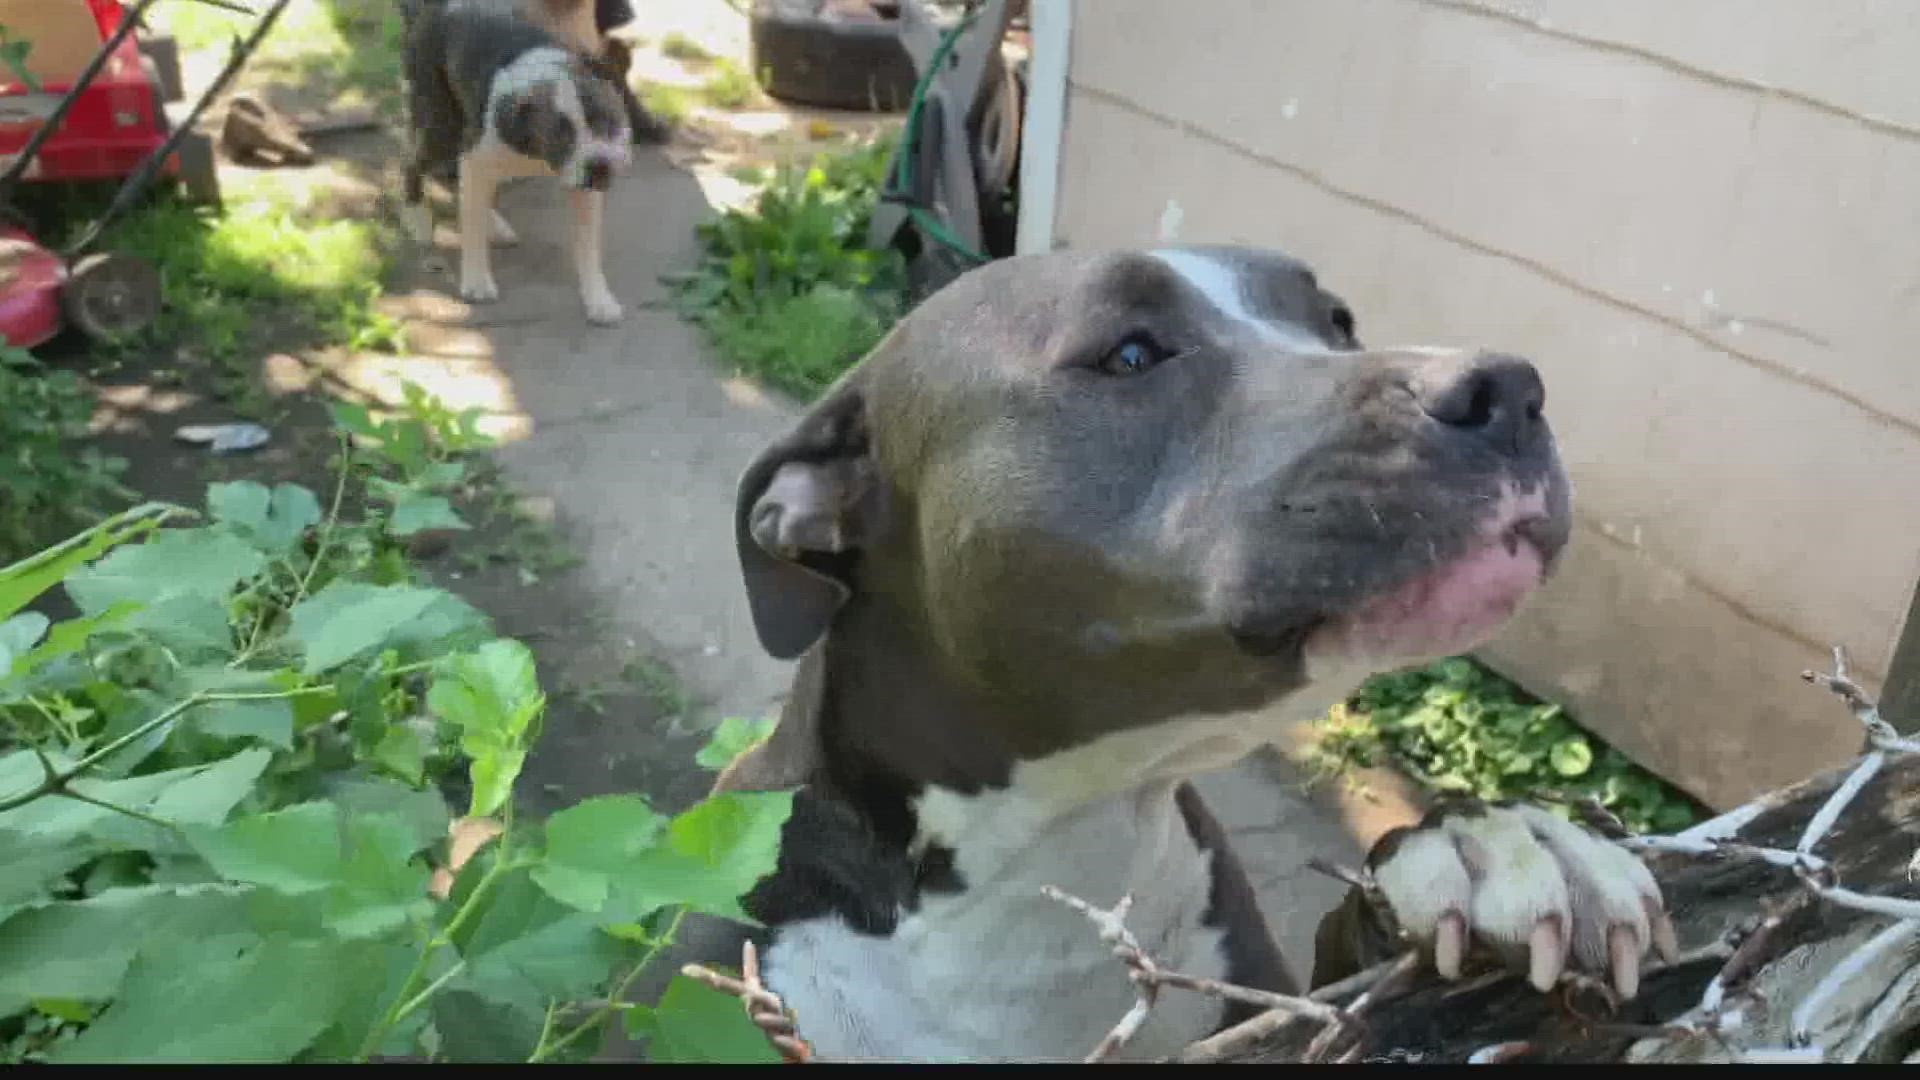 The two pit bull dogs, Sheba and Izzy, were involved in at least four recent attacks that terrorized neighbors.